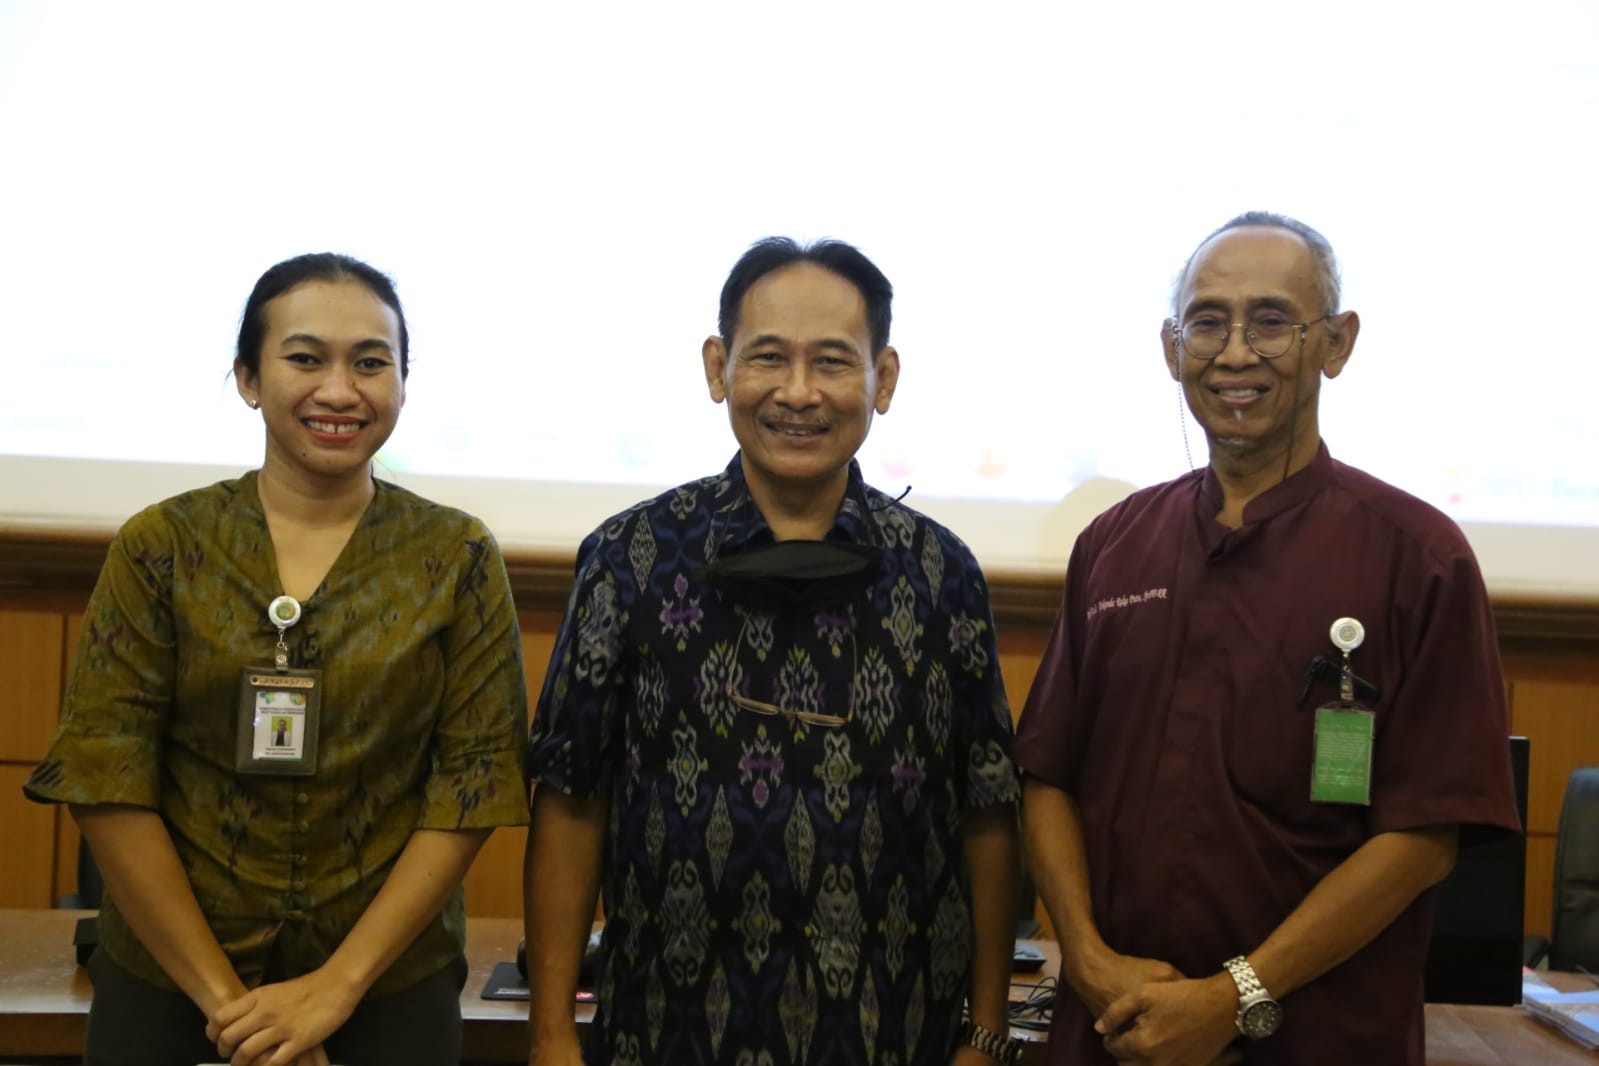 Election of the Chair of the Senate of Udayana University's Faculty of Medicine for the term 2022-2026